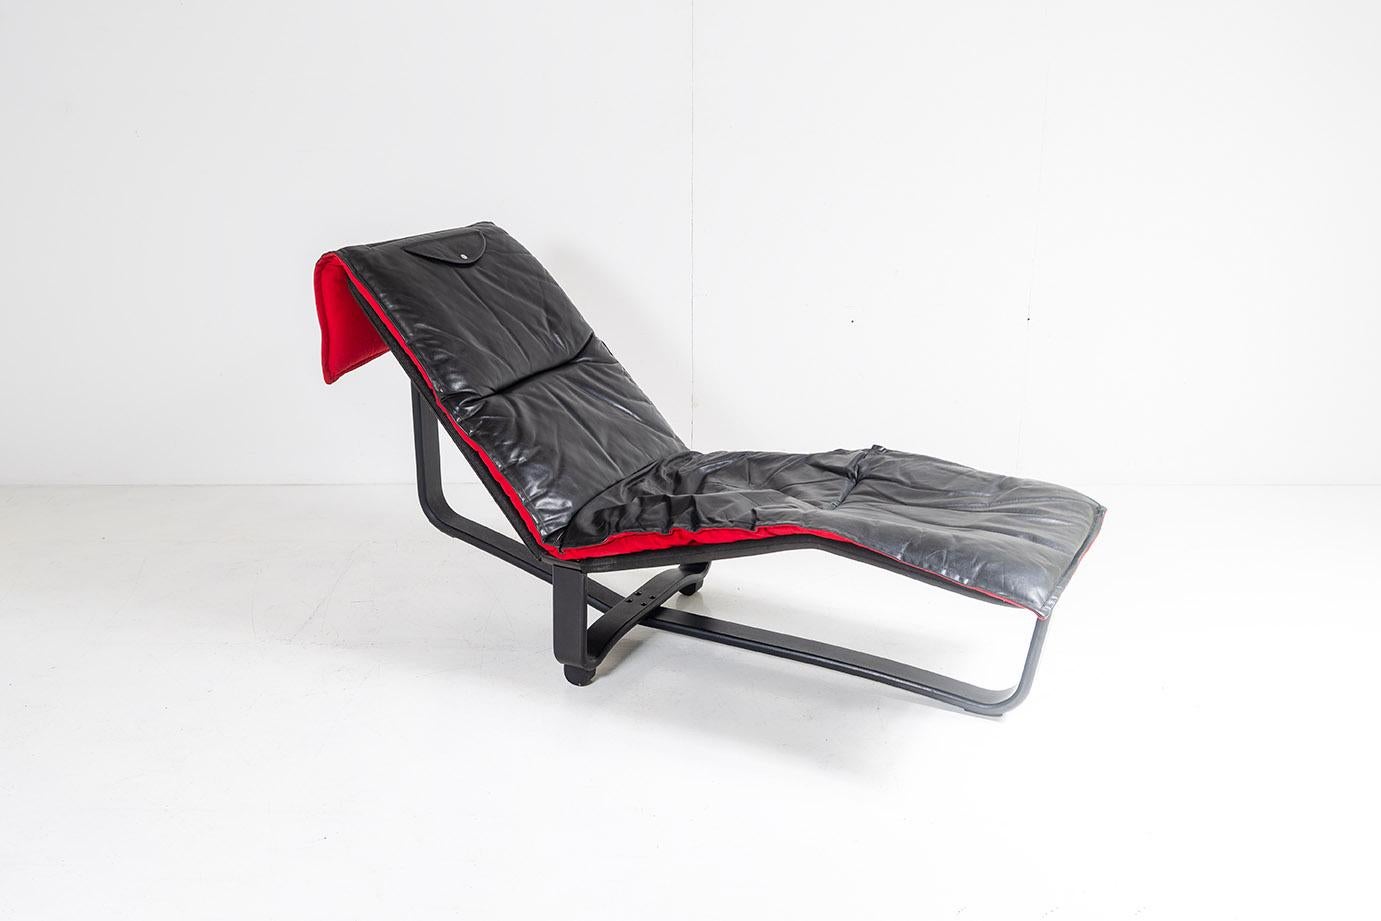 A superb late 1970s black leather chaise deigned by Ingmar & Knut Relling for Westnofa.  Black Leather with reversible loose cushion that can be flipped to reveal the soft red velour material.

A very comfortable chair which can be set to two